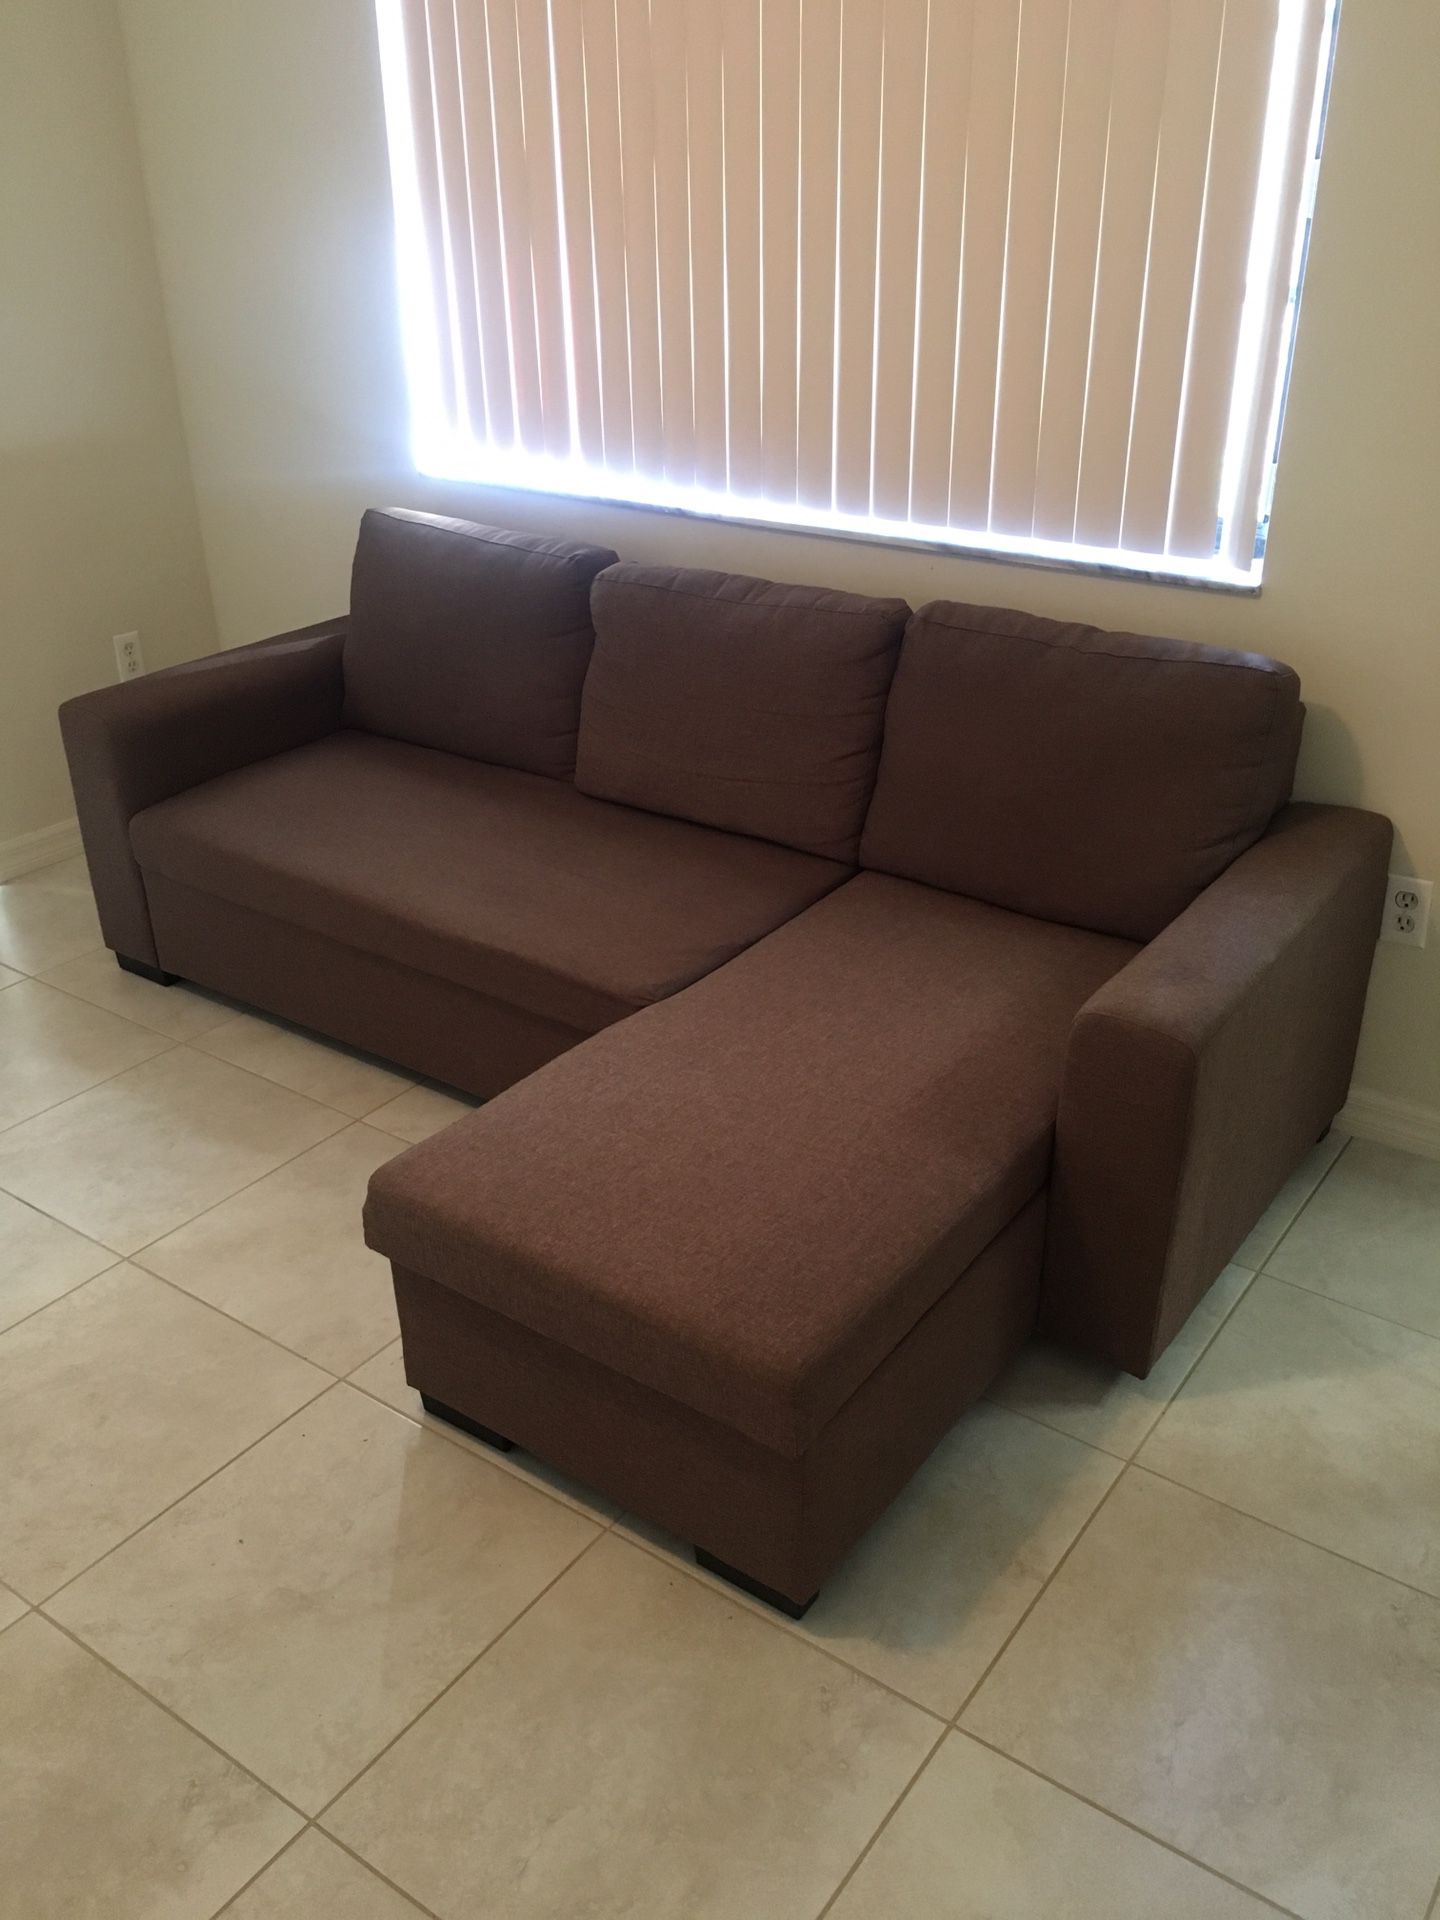 Sectional sofa with pull-out bed and compartment